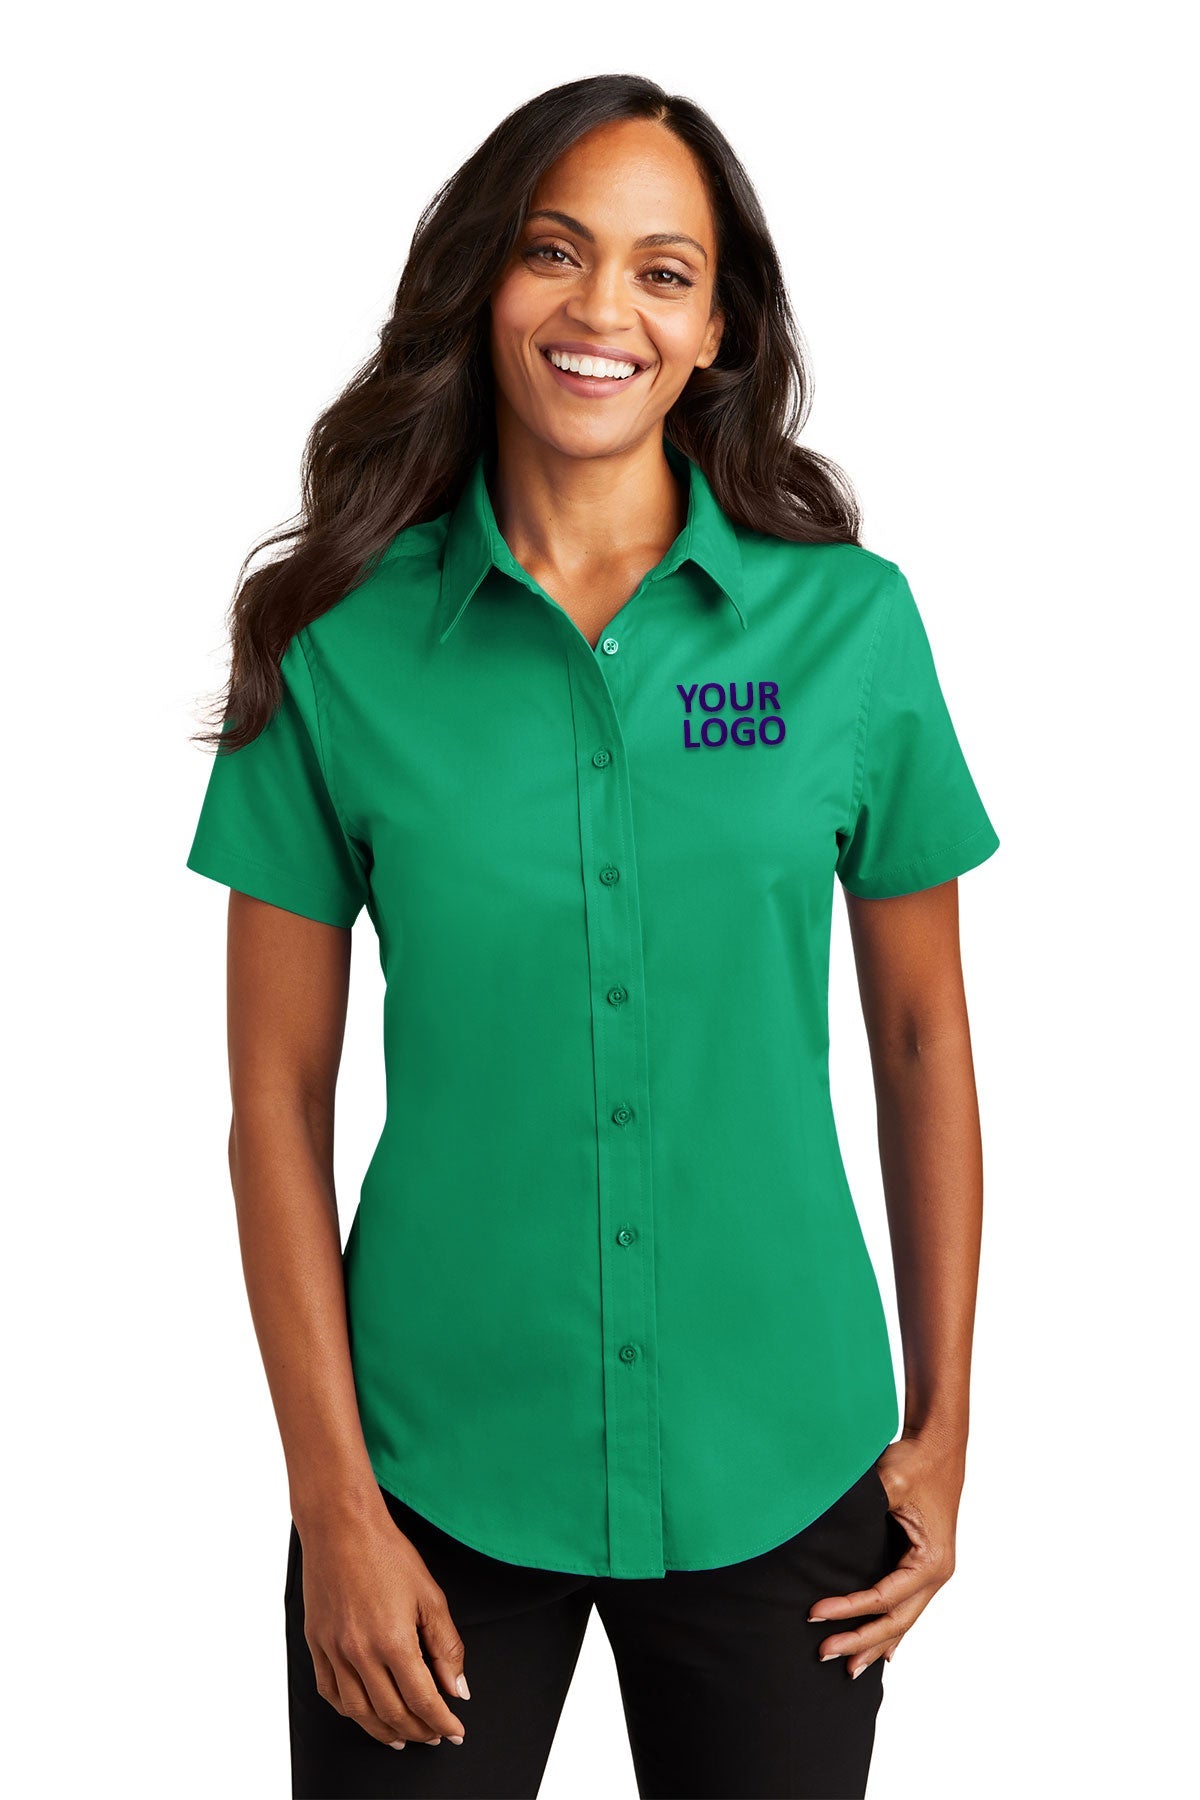 Port Authority Court Green L508 order embroidered polo shirts